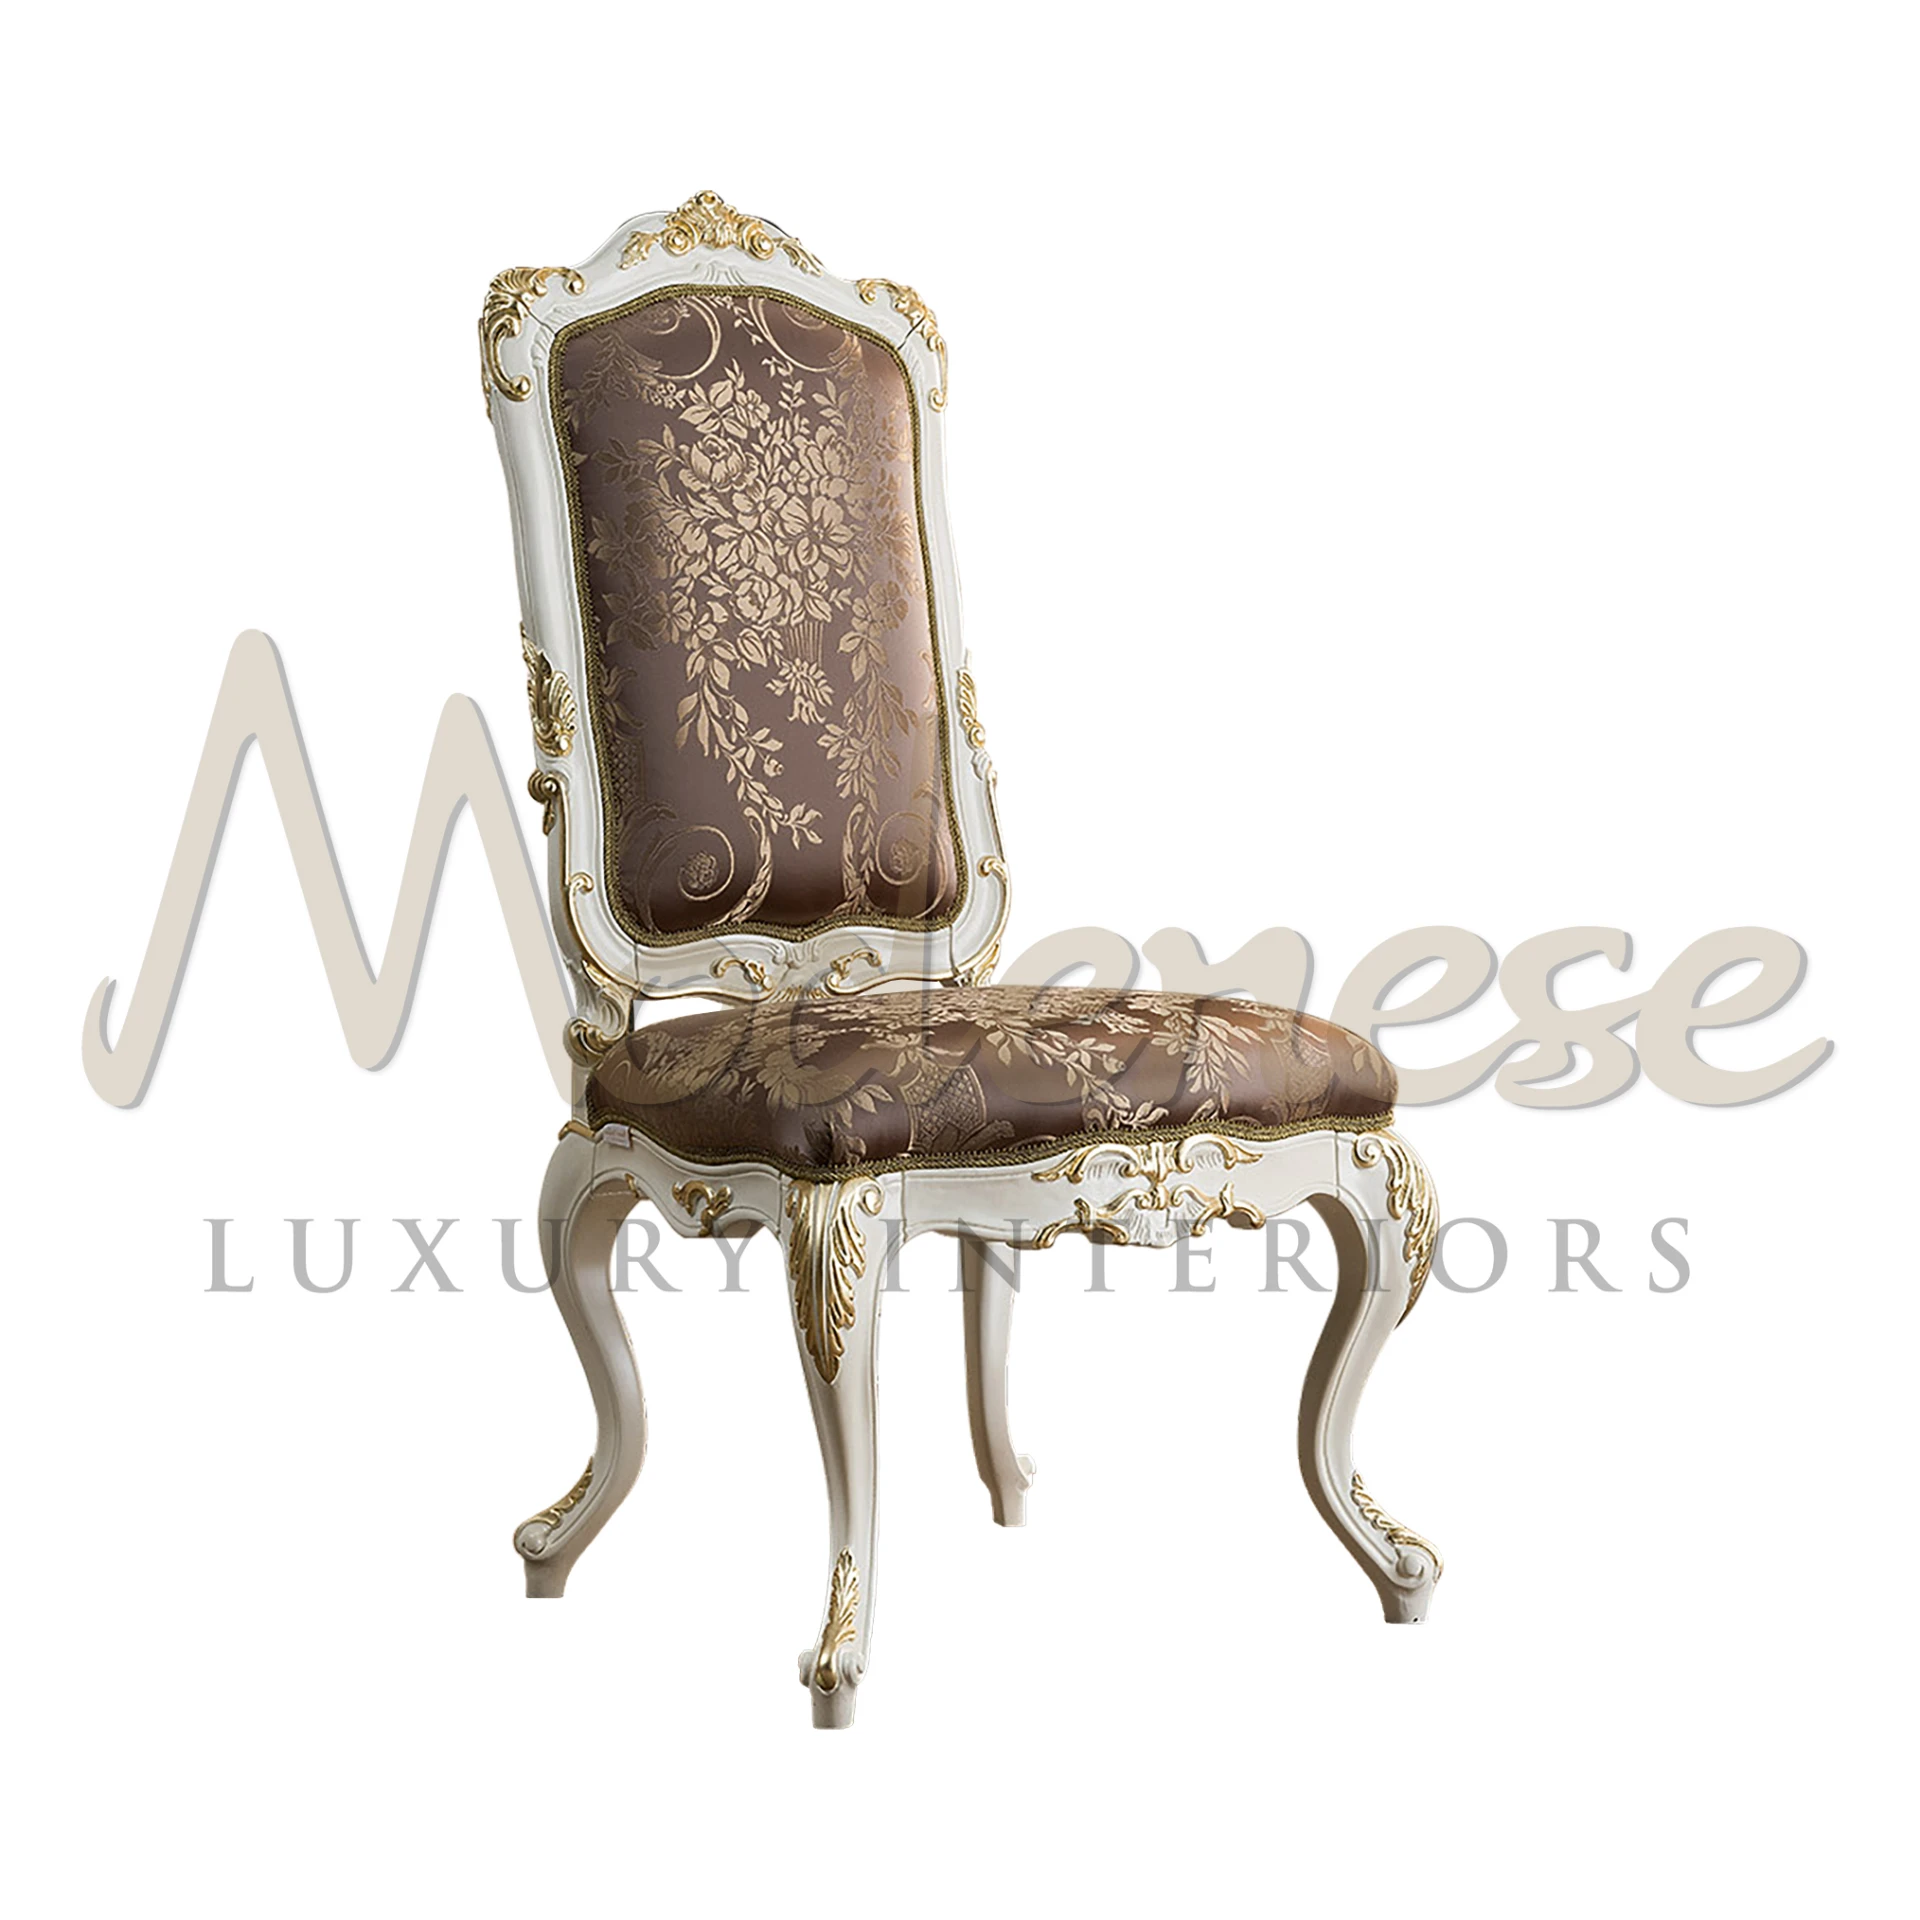 Discover your dining room with Modenese Furniture's regal chair. Baroque legs, light purple fabric, and gold leaf details exude refinement.